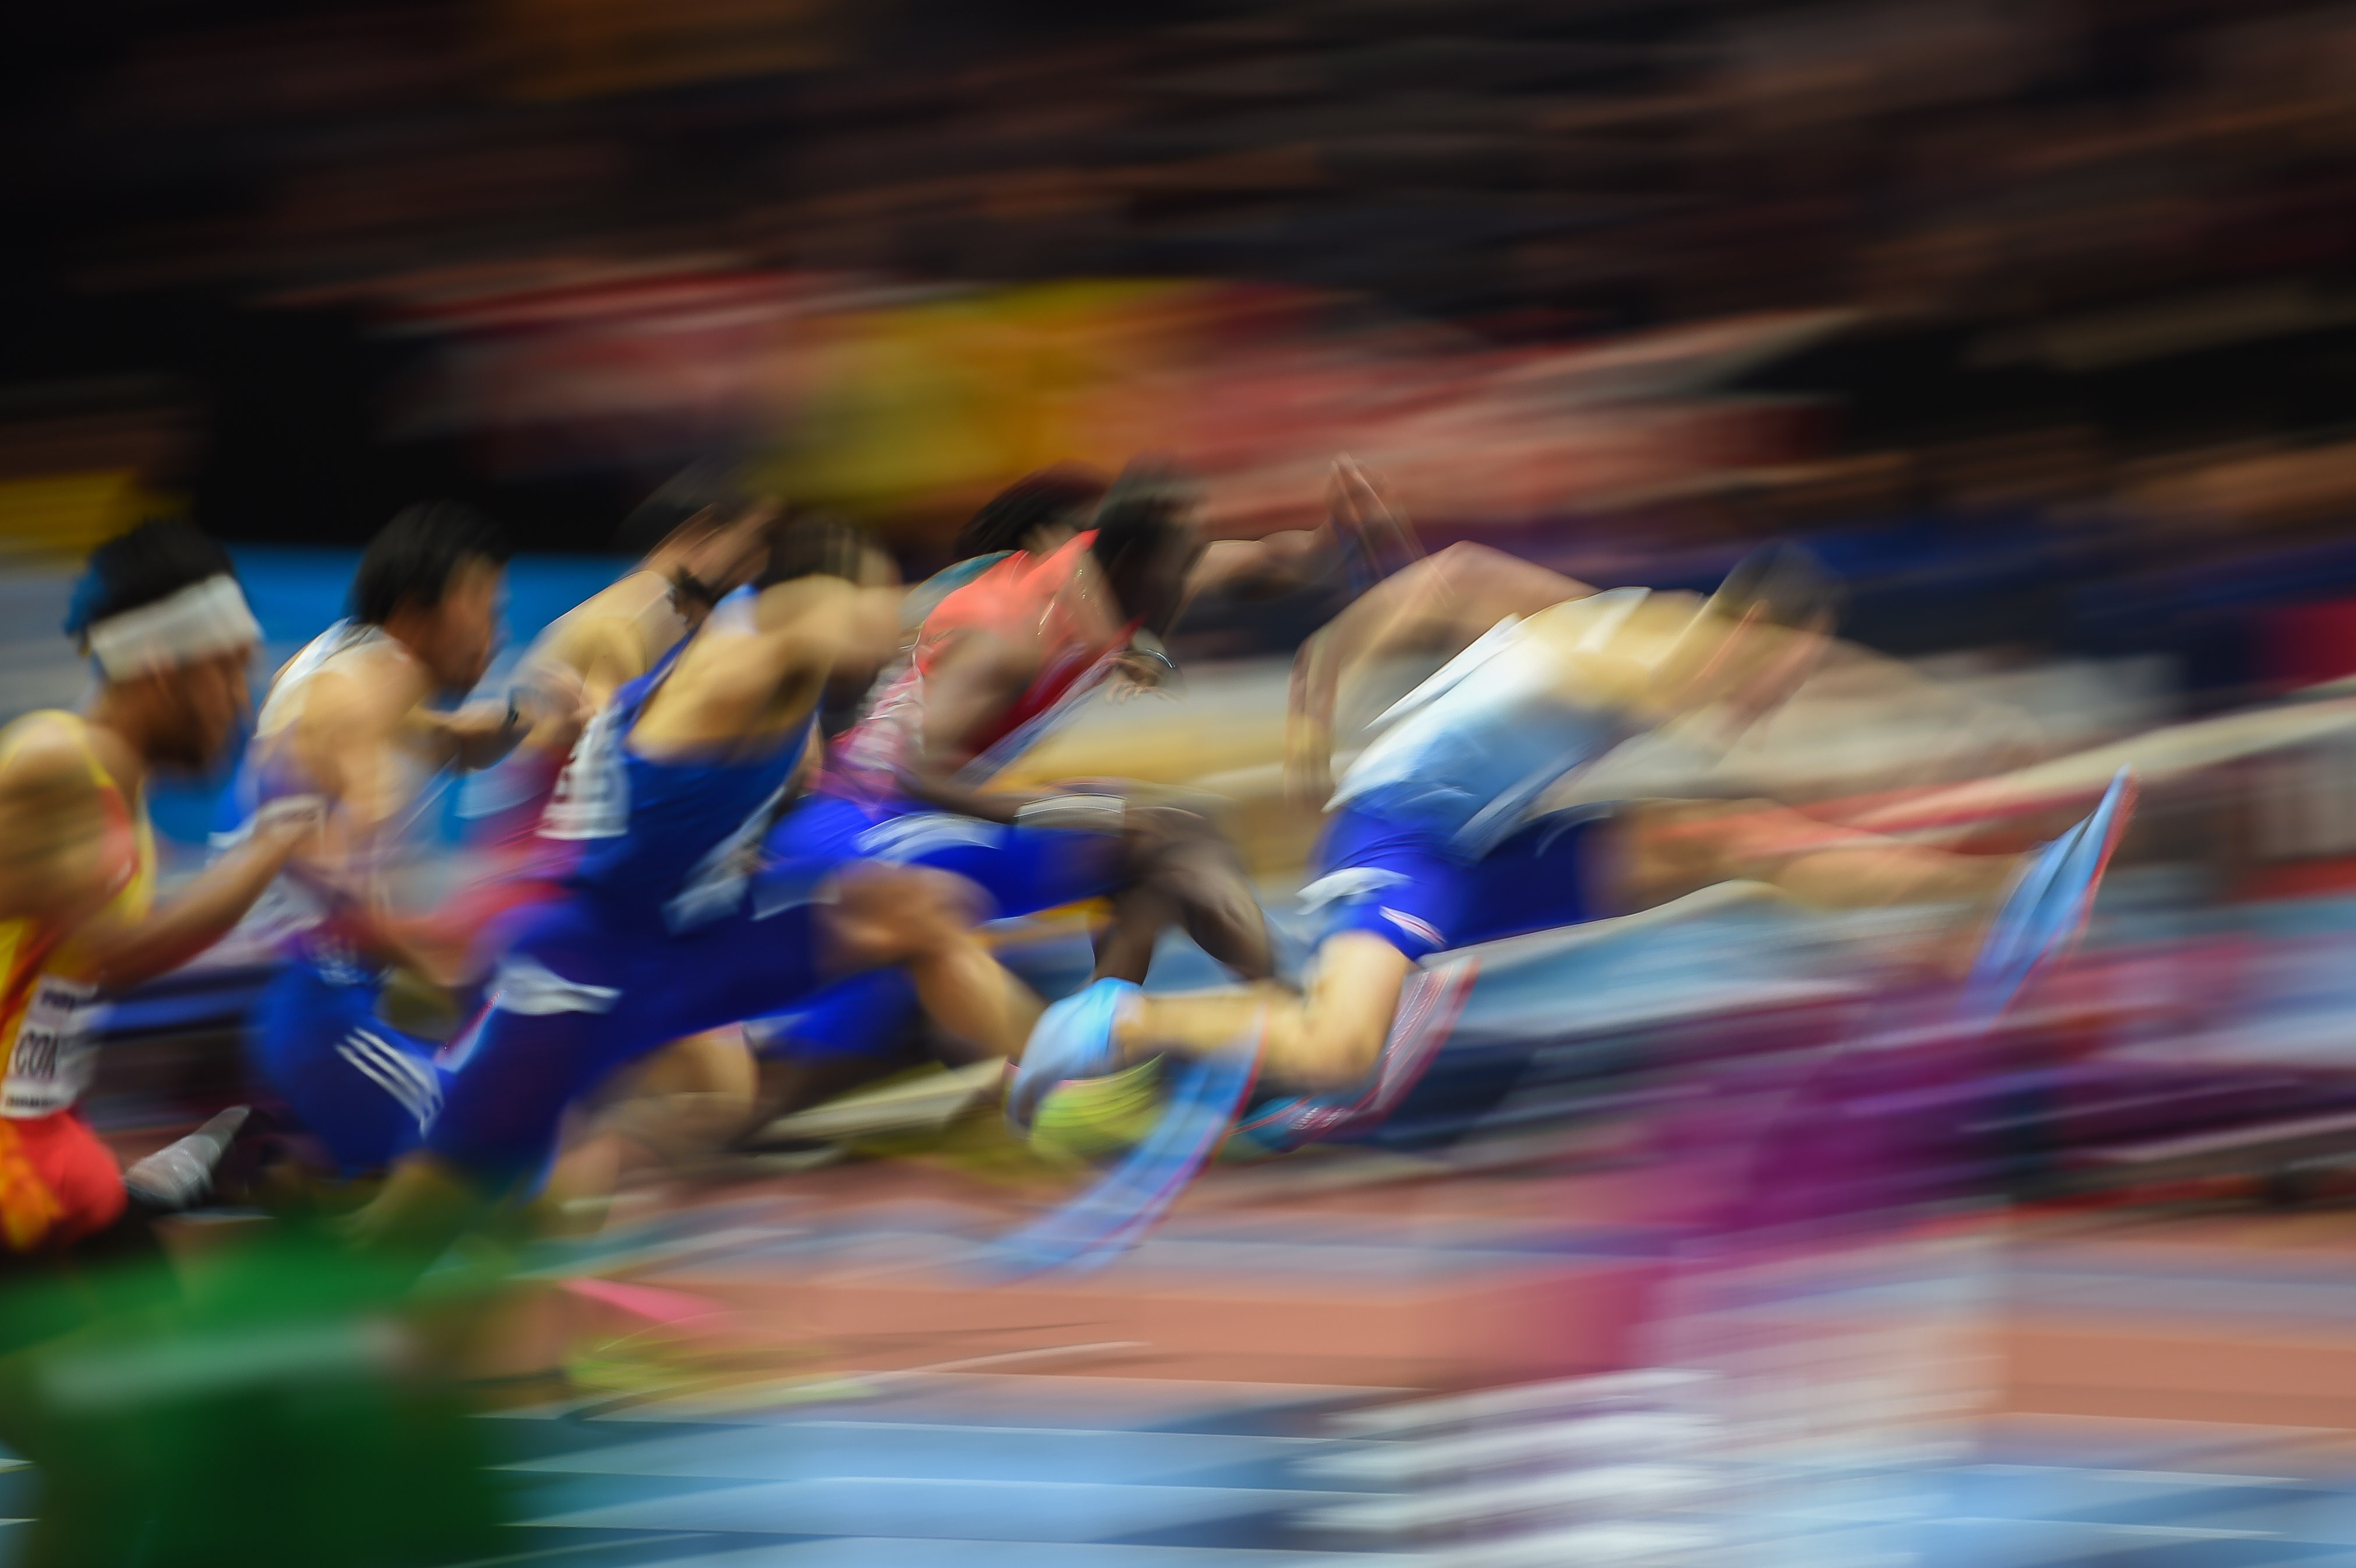 The 2020 World Athletics Indoor Championships are the most high-profile sporting casualty of the coronavirus outbreak. Photo: Ulrik Pedersen/NurPhoto via Getty Images